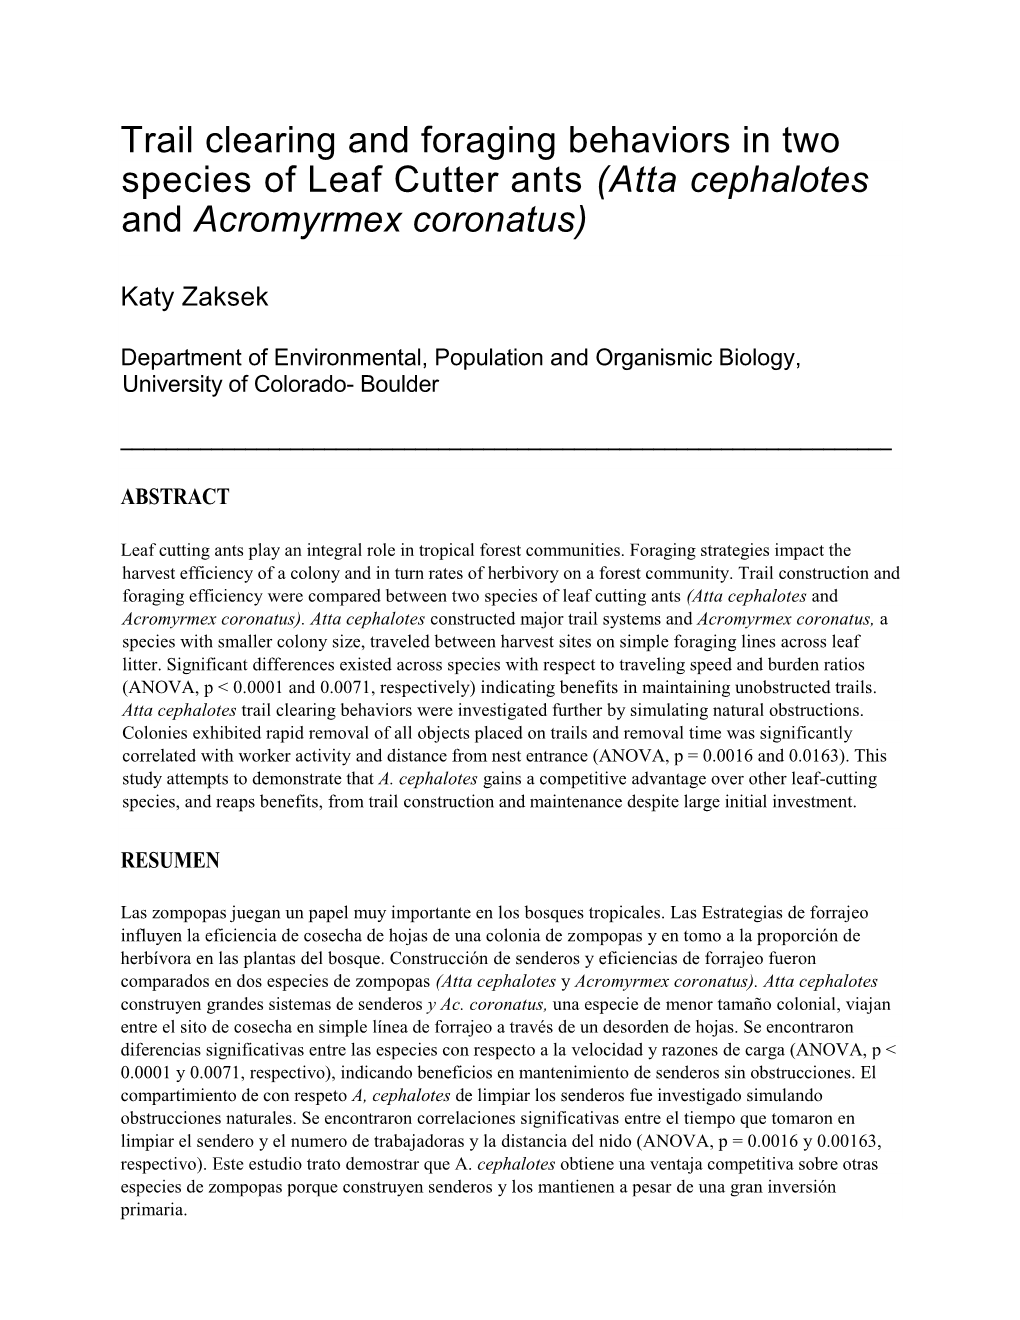 Trail Clearing and Foraging Behaviors in Two Species of Leaf Cutter Ants (Atta Cephalotes and Acromyrmex Coronatus)